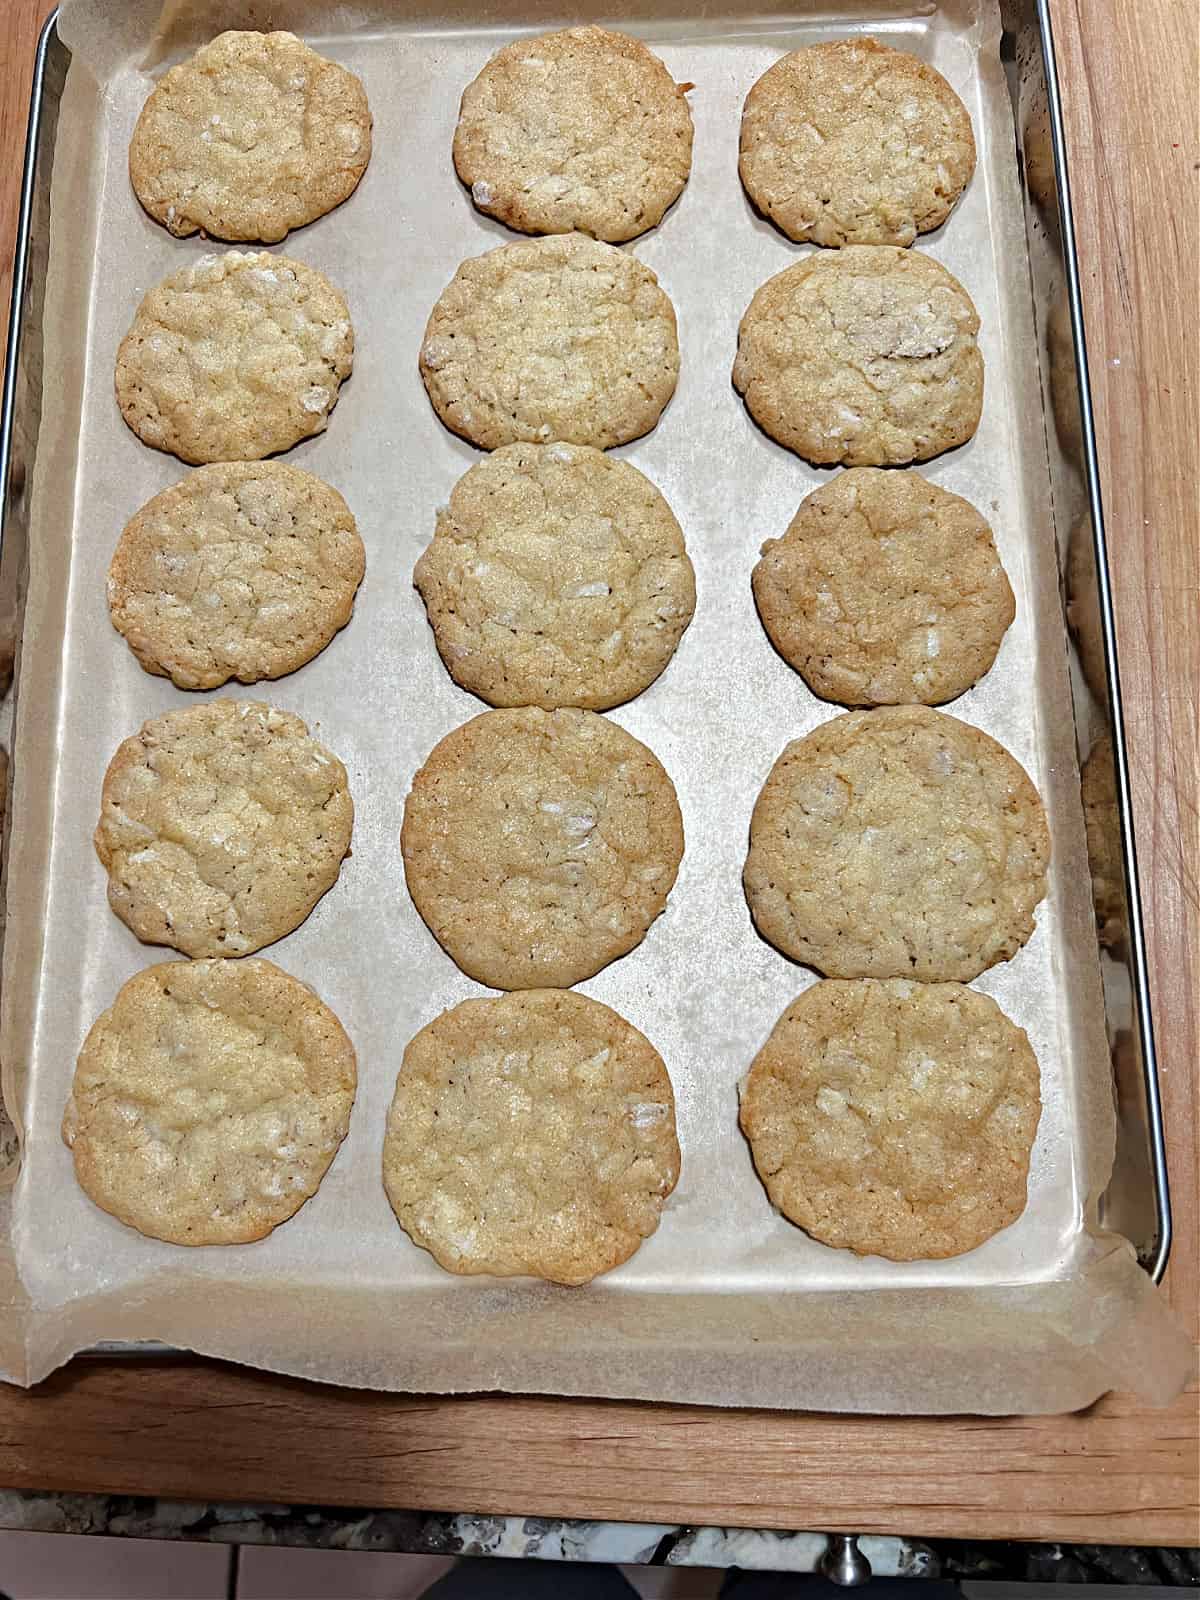 baked coconut oatmeal cookies cooling on the baking sheet.